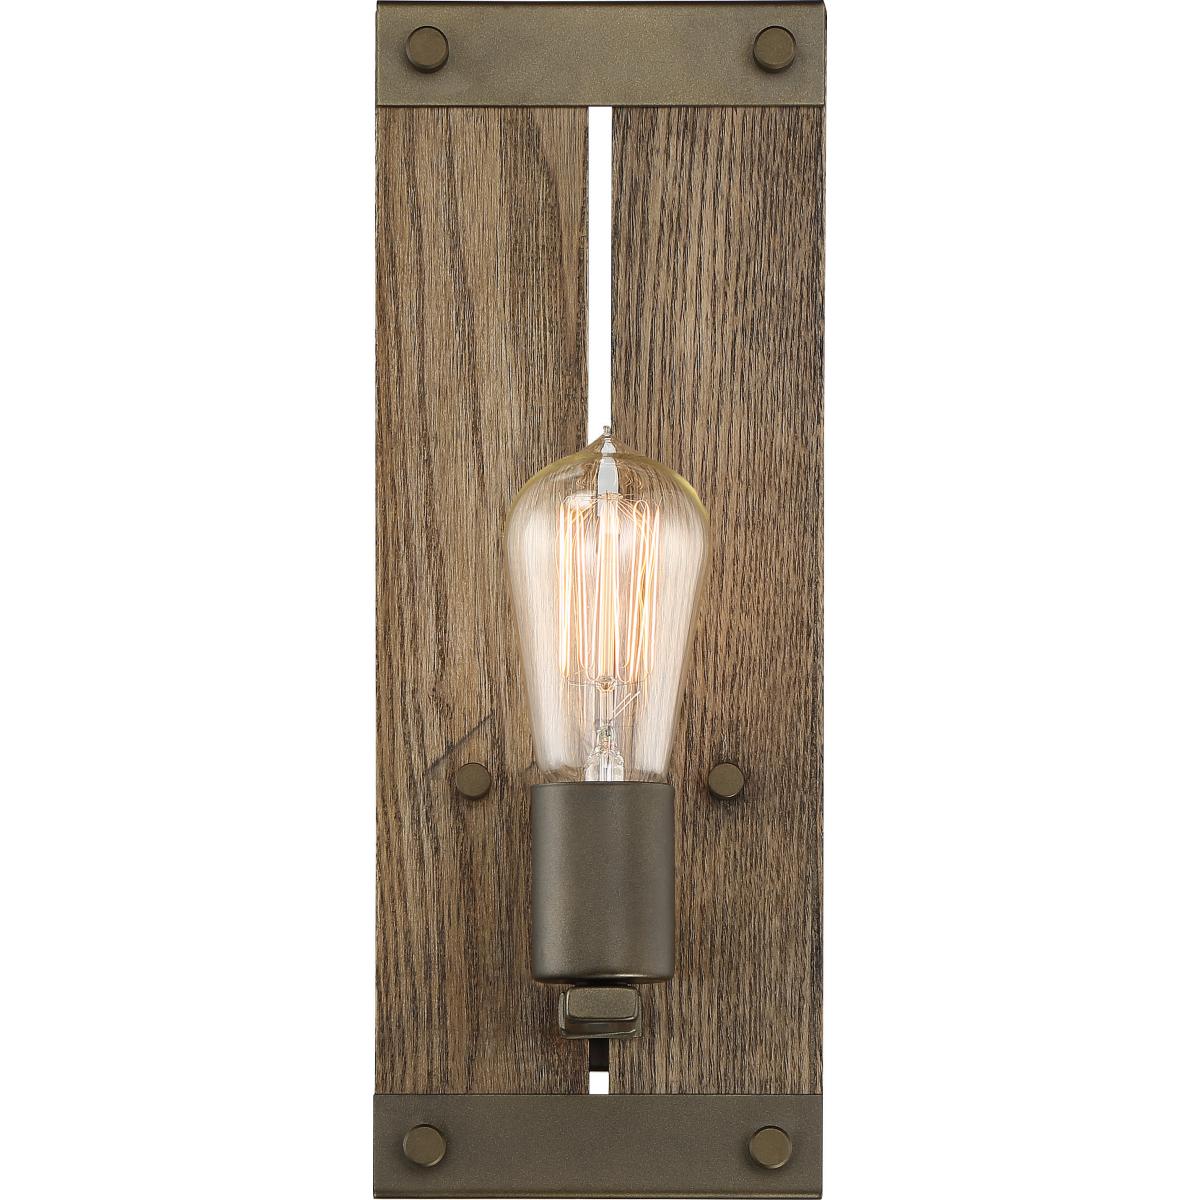 60-6427 WINCHESTER 1 LIGHT WALL SCONCE